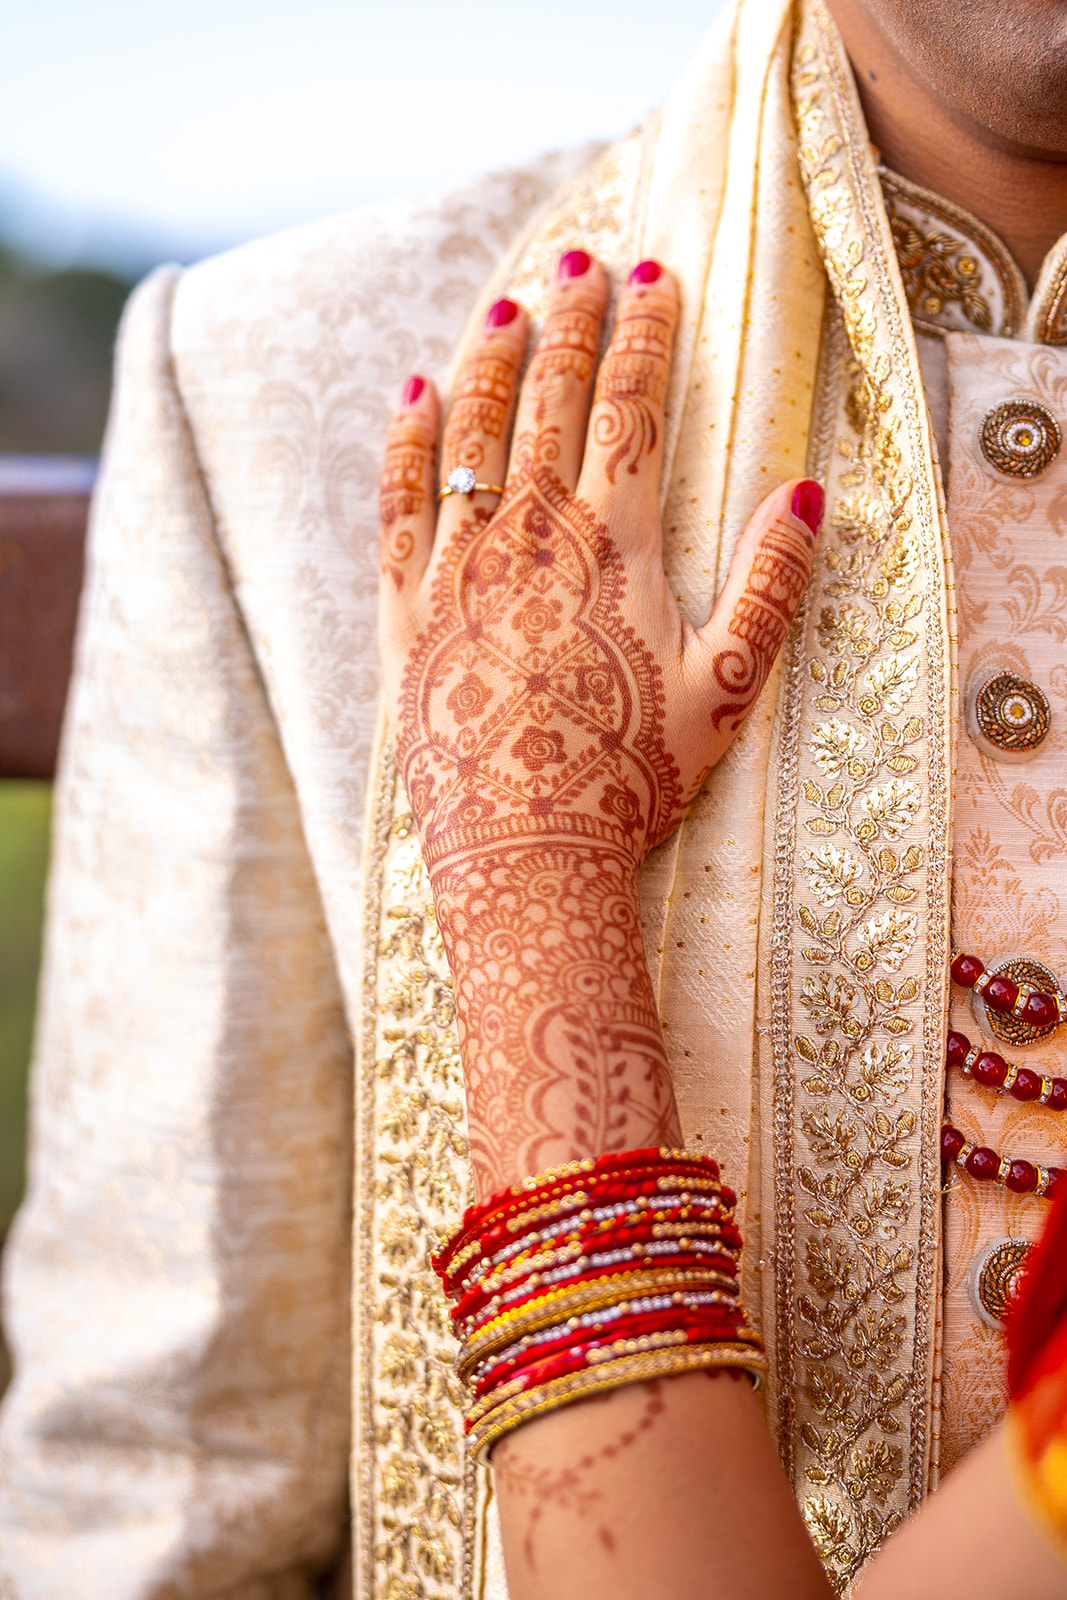 Indian wedding bride's hand with henna on groom's chest.